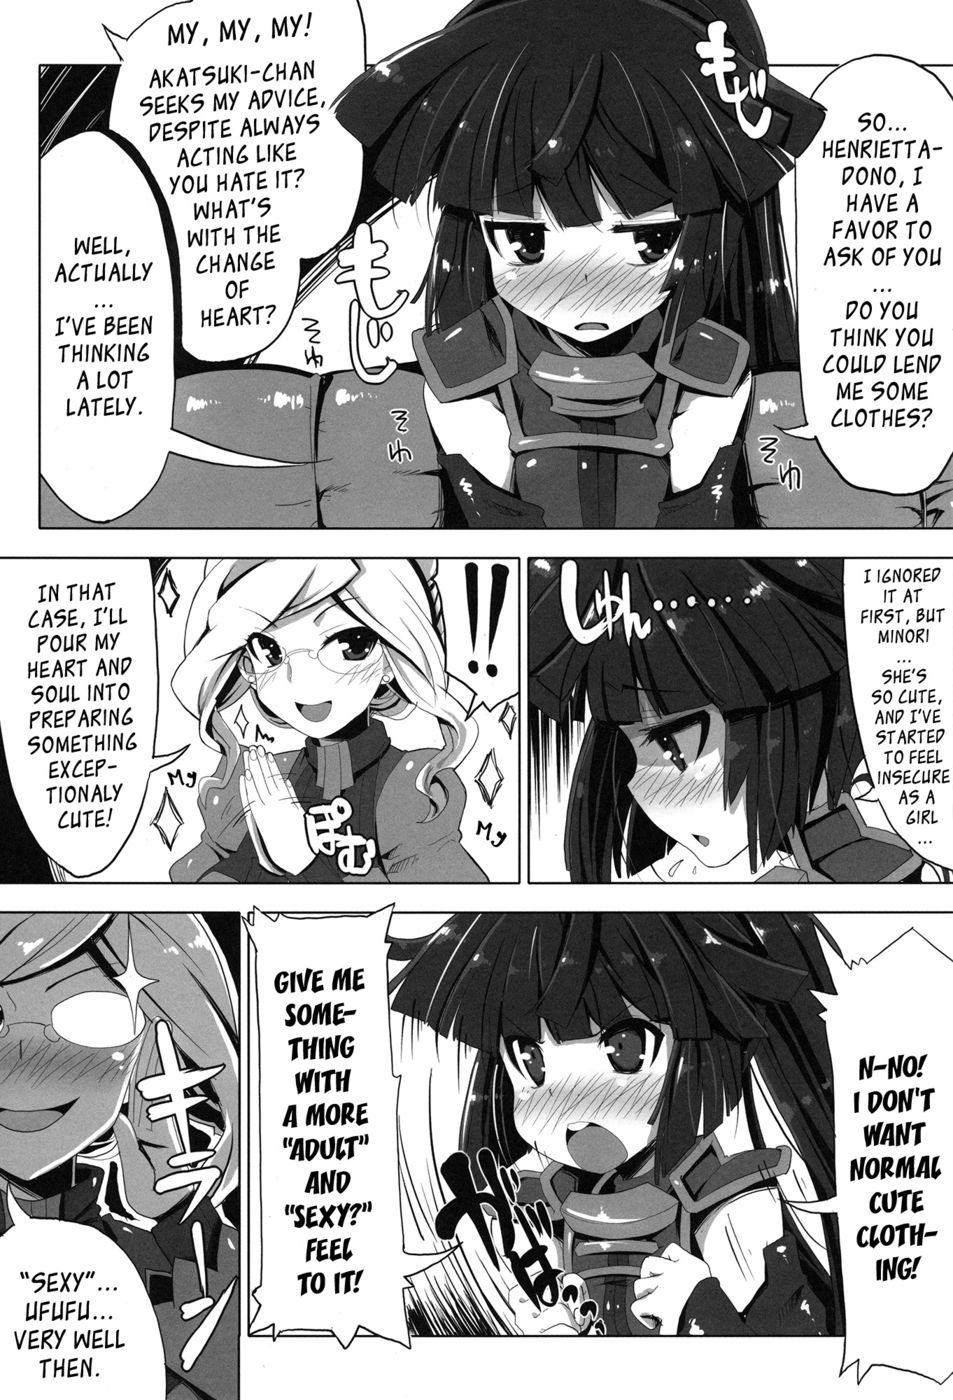 Hentai Manga Comic-Rare Equpiment in an MMO Means Erotic Equpiment, Right-Read-3